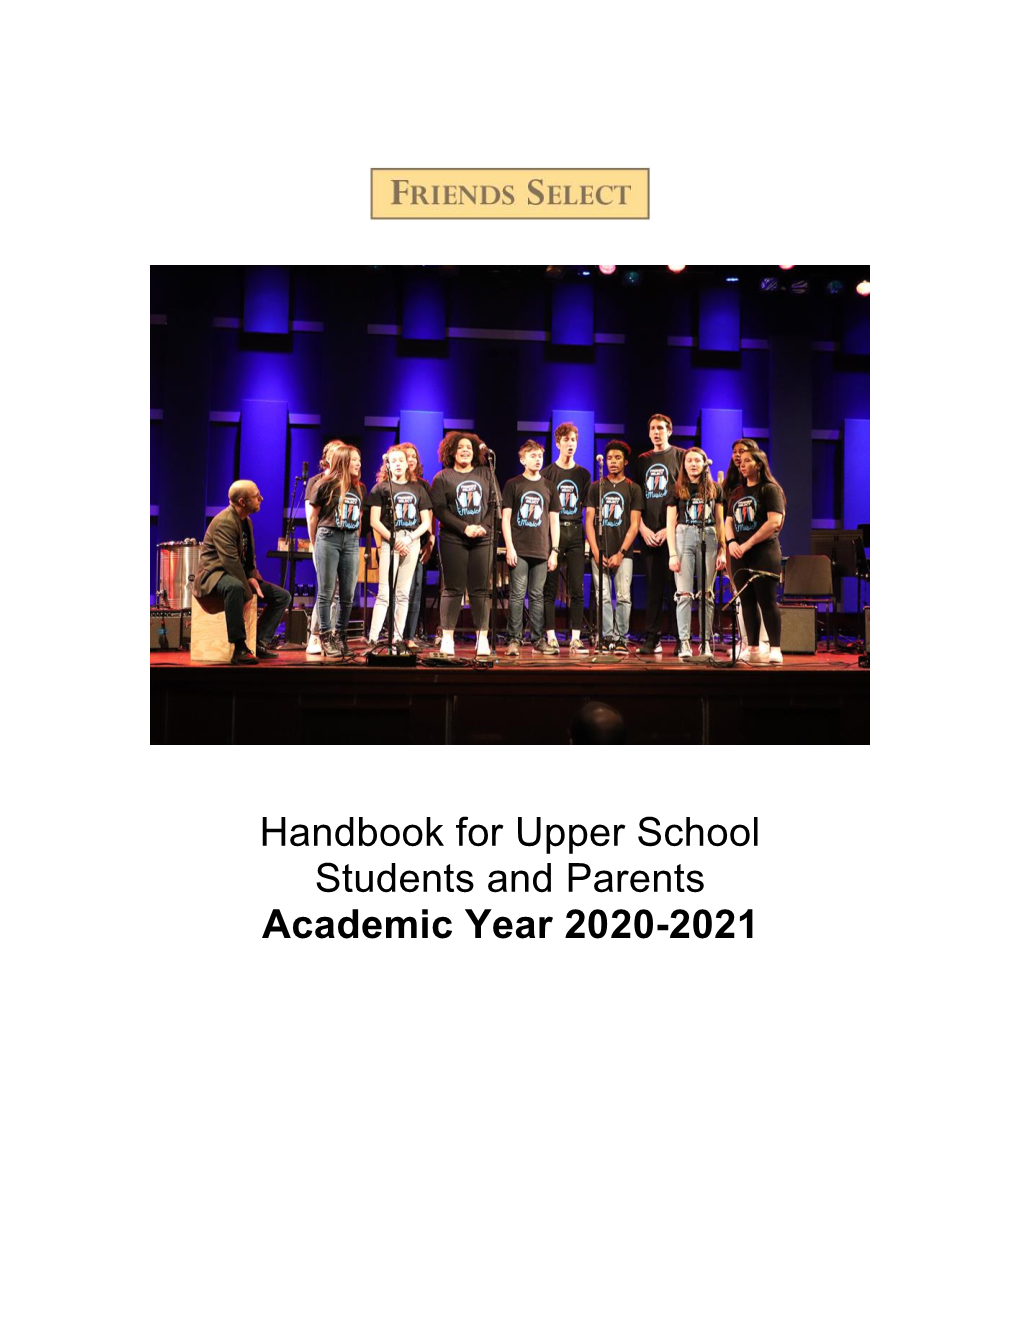 Handbook for Upper School Students and Parents Academic Year 2020-2021